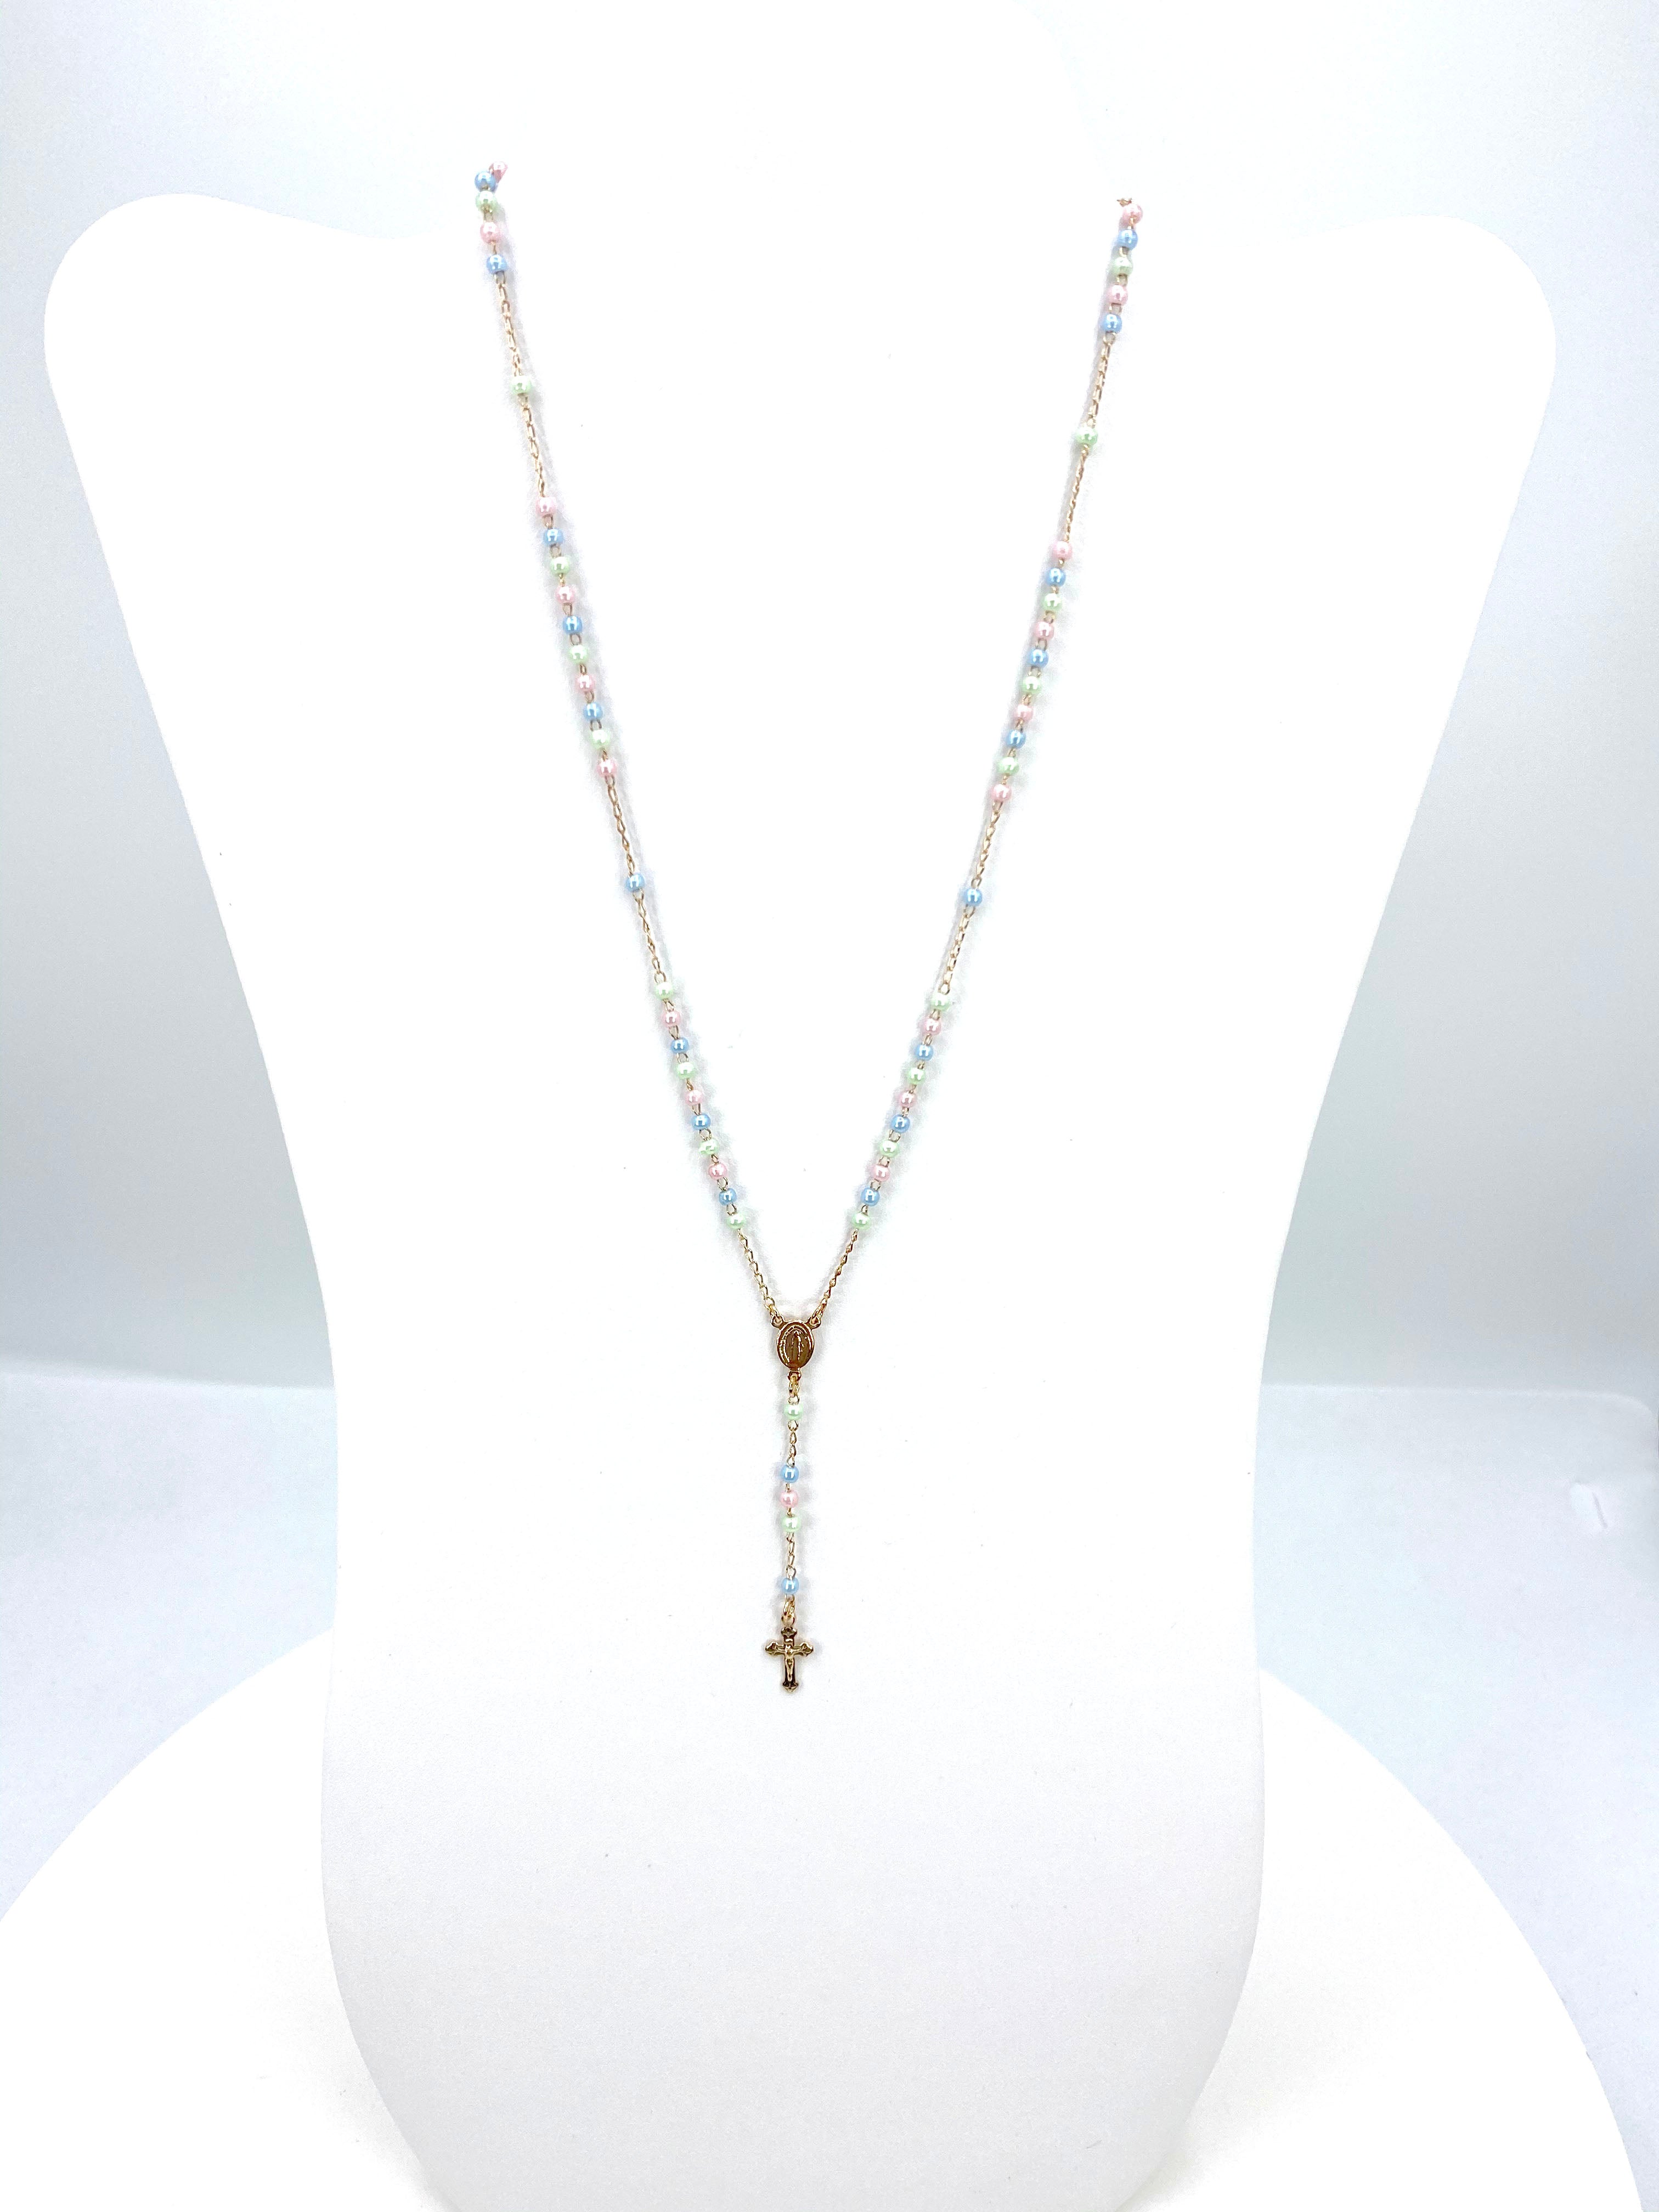 Pastel colored Rosary Necklace